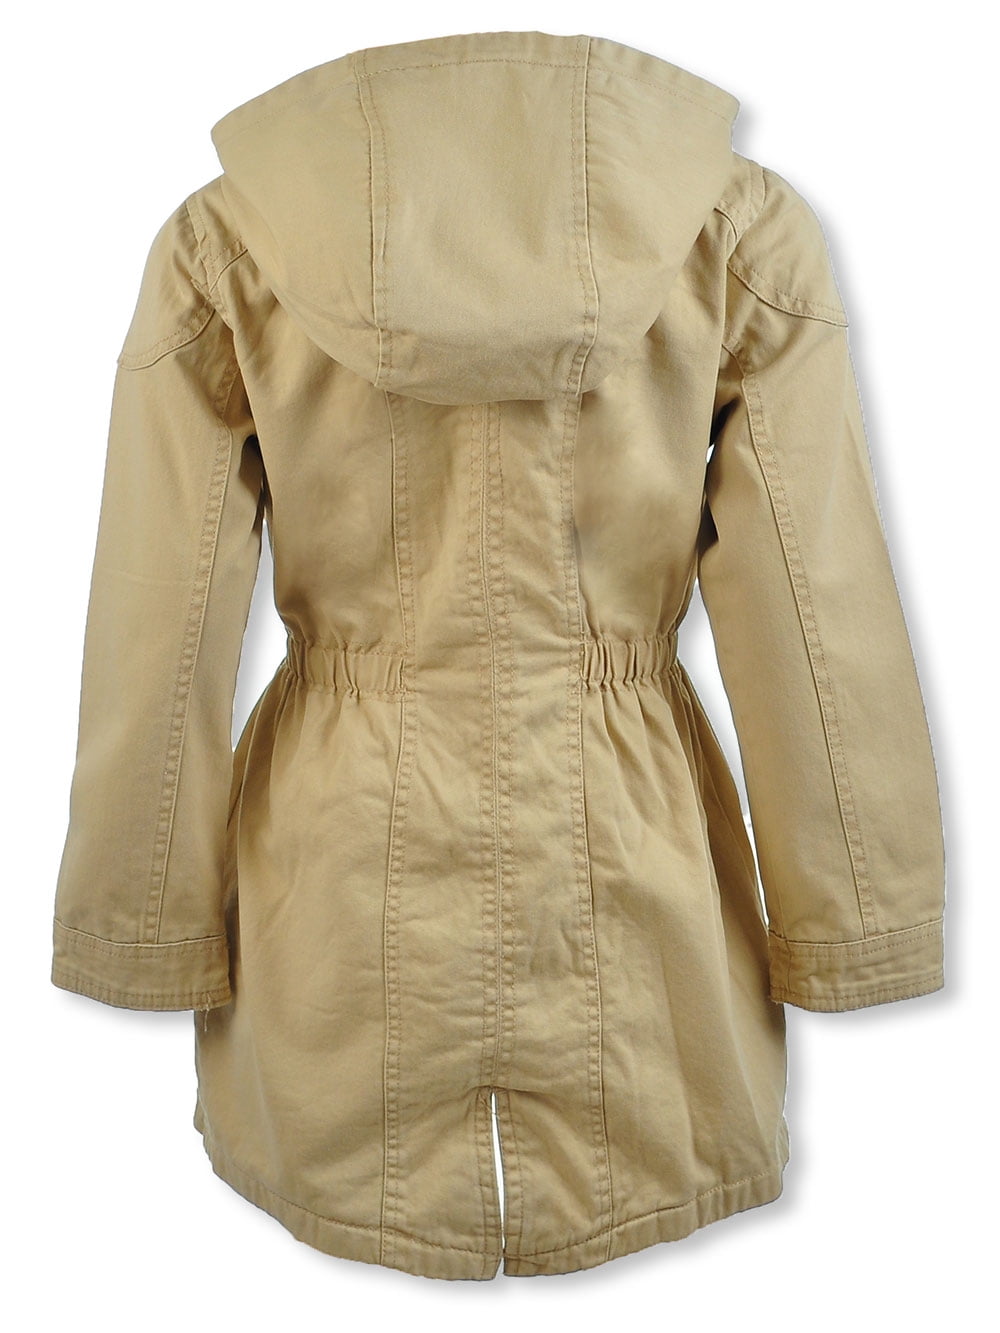 Hooded Details about   Urban Republic Baby Girl Twill Anorack Khaki Jacket 18 Months New 